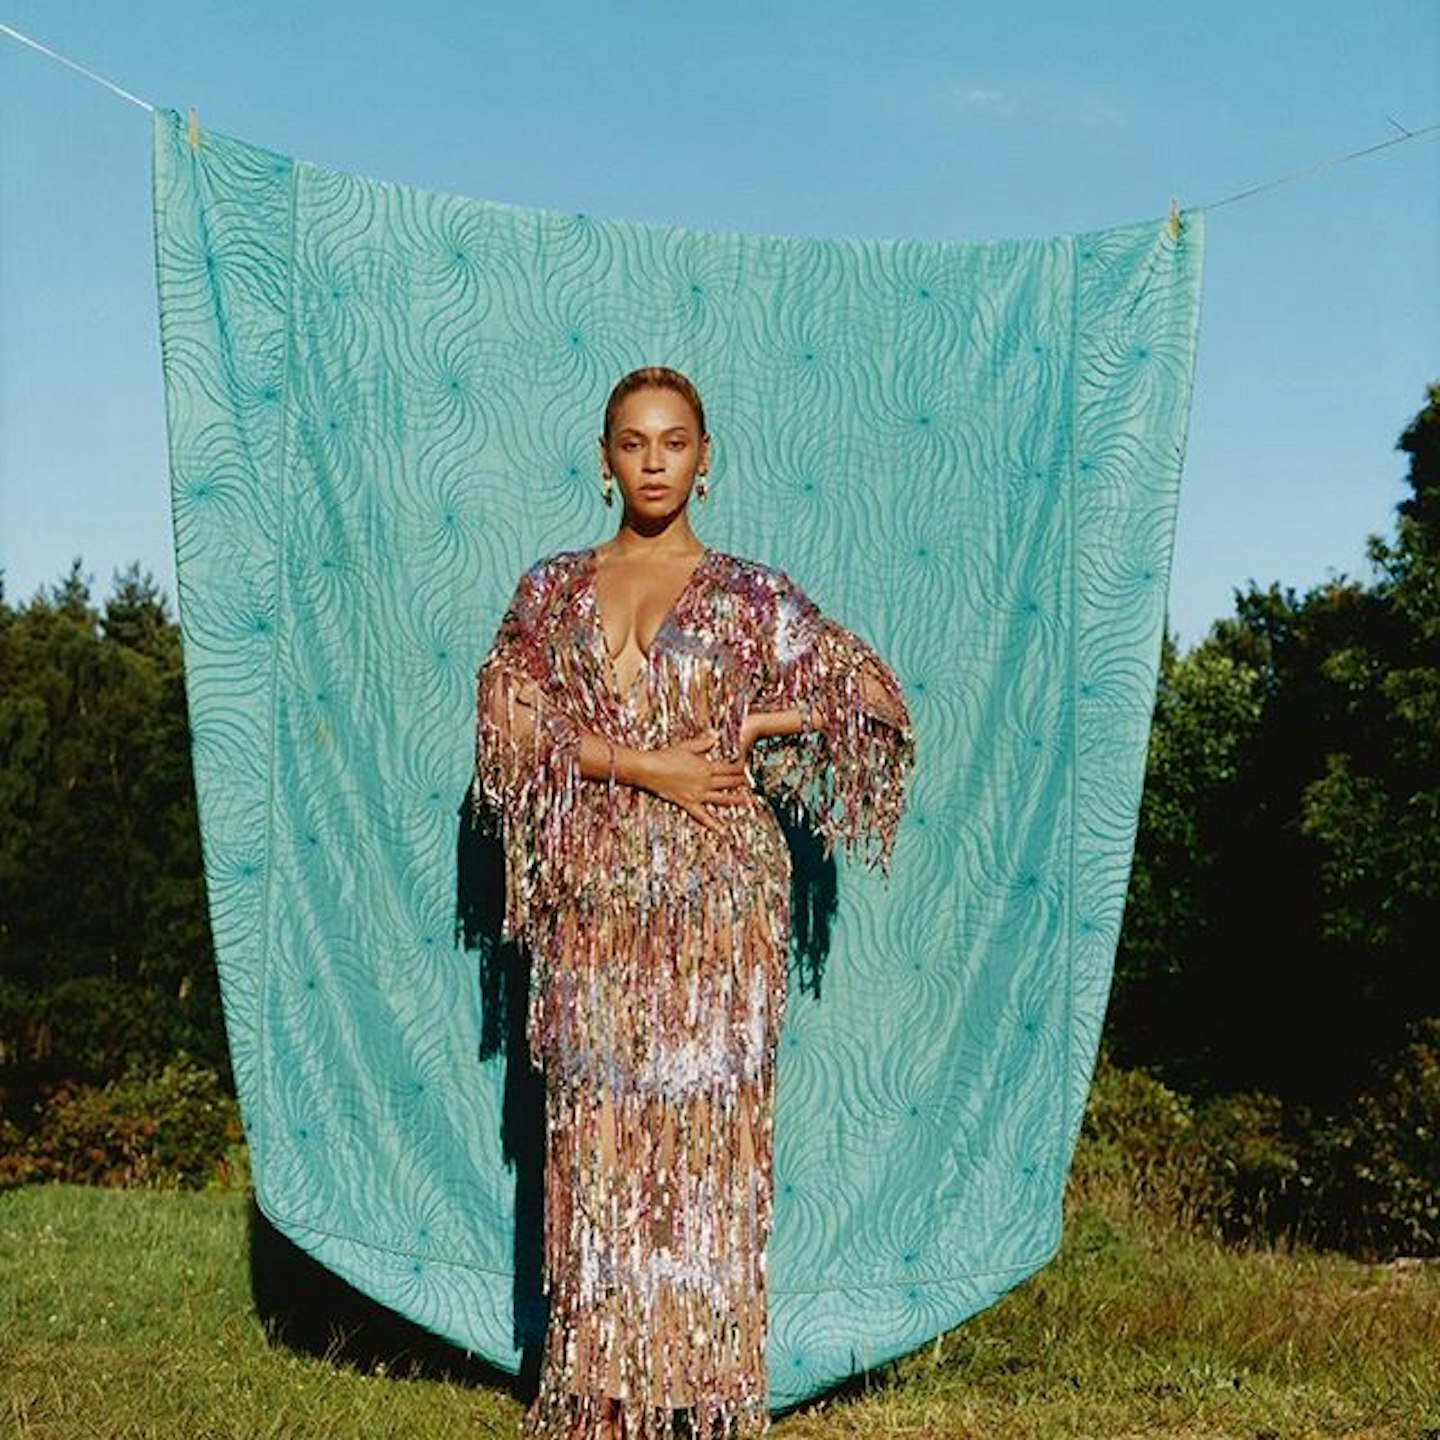 Beyoncé Talked About Her FUPA and Body Image in Vogue